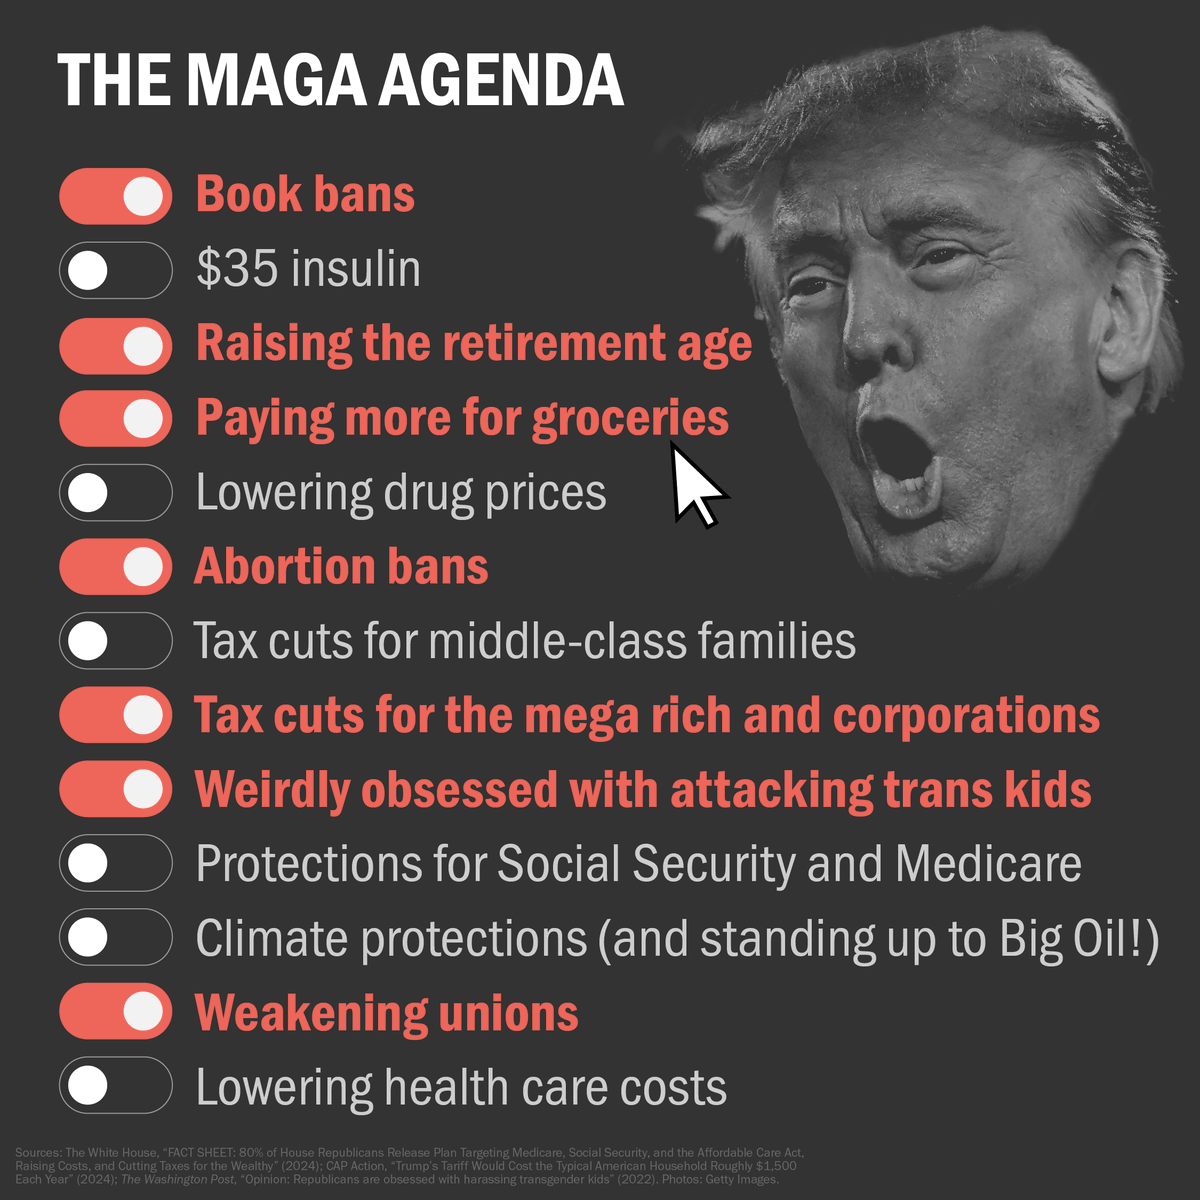 Their agenda makes it clear: MAGA Republicans are not working with your best interests in mind.